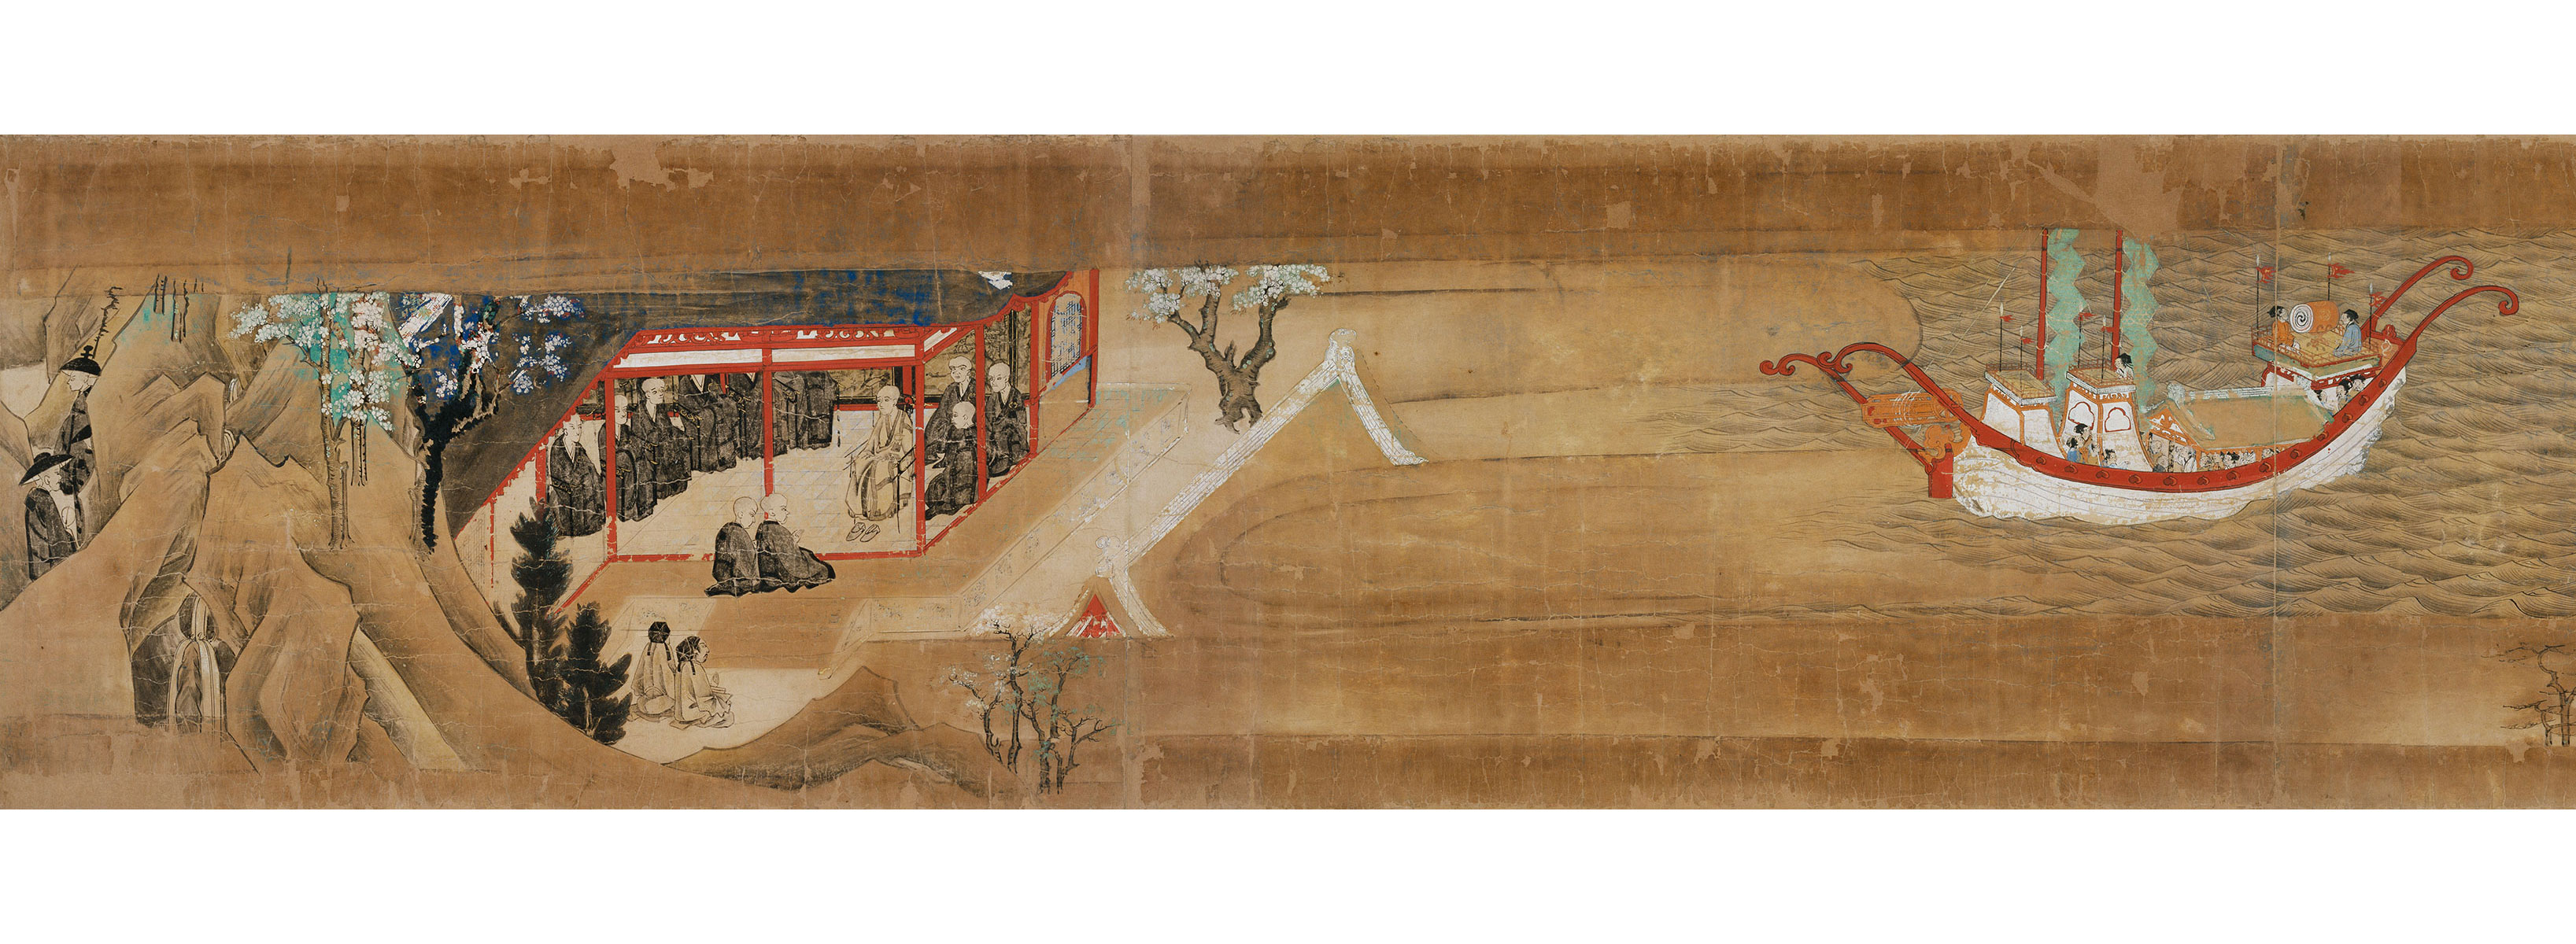 Important Cultural Property Toseiden emaki (Illustrated Scrolls of Ganjin-Wajo’s expedition to Japan), Volume 1